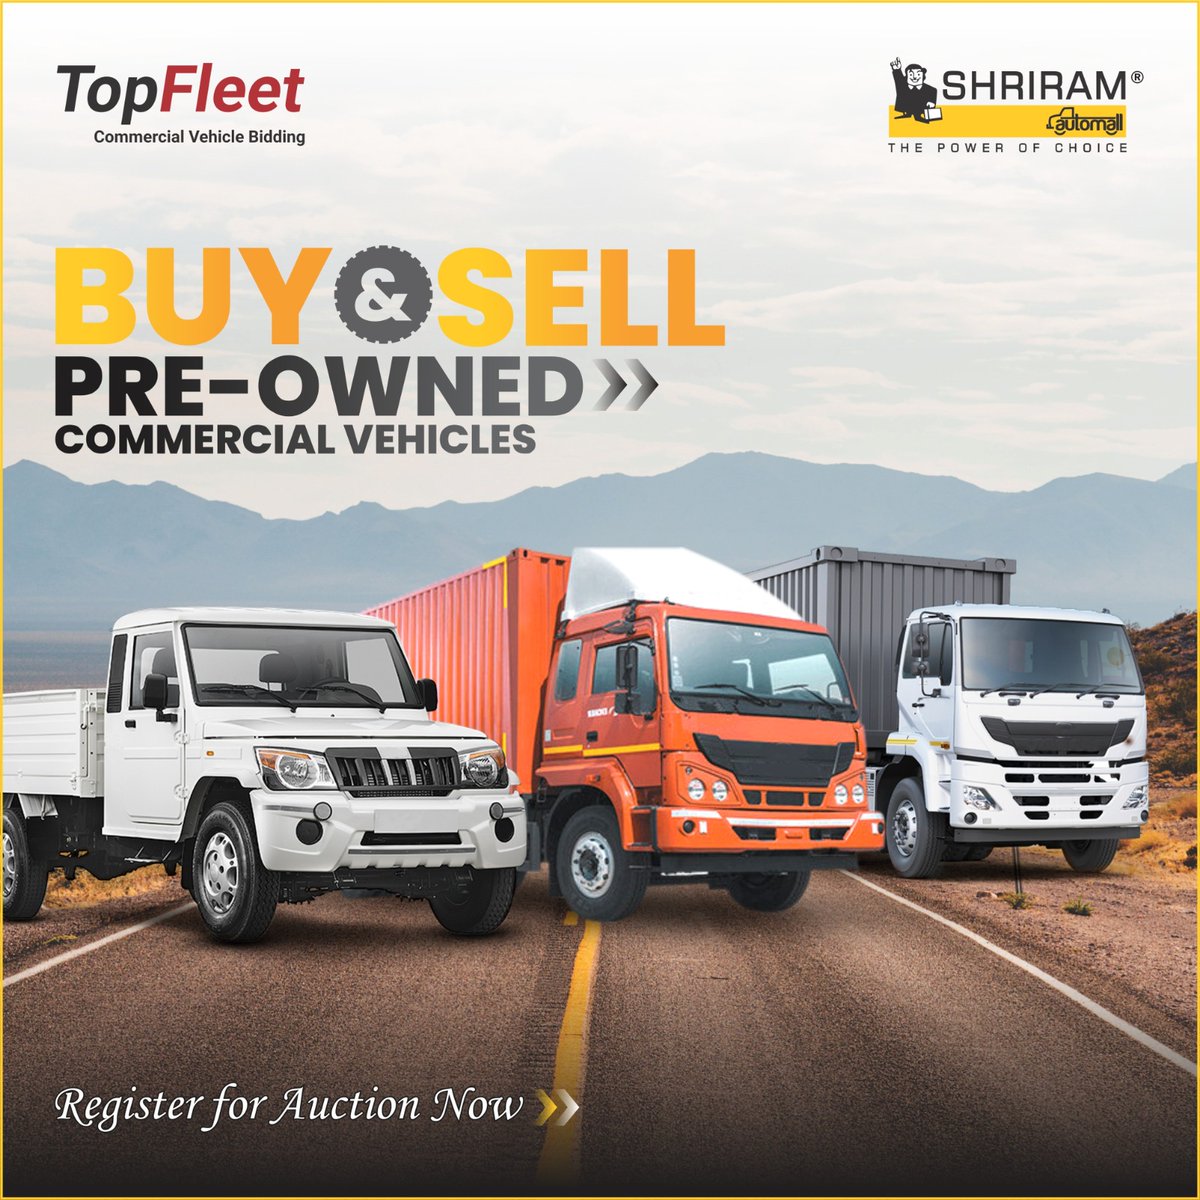 Buy the Used Commercial Vehicles of Your Choice.

Registered Now: l.samil.in/46P9Osps

#UsedVehicles #UsedEquipment #PhysicalAuction #CommercialVehicles #Sell #BuyNow #Samil #ShriramAutomall #ProudSamilian